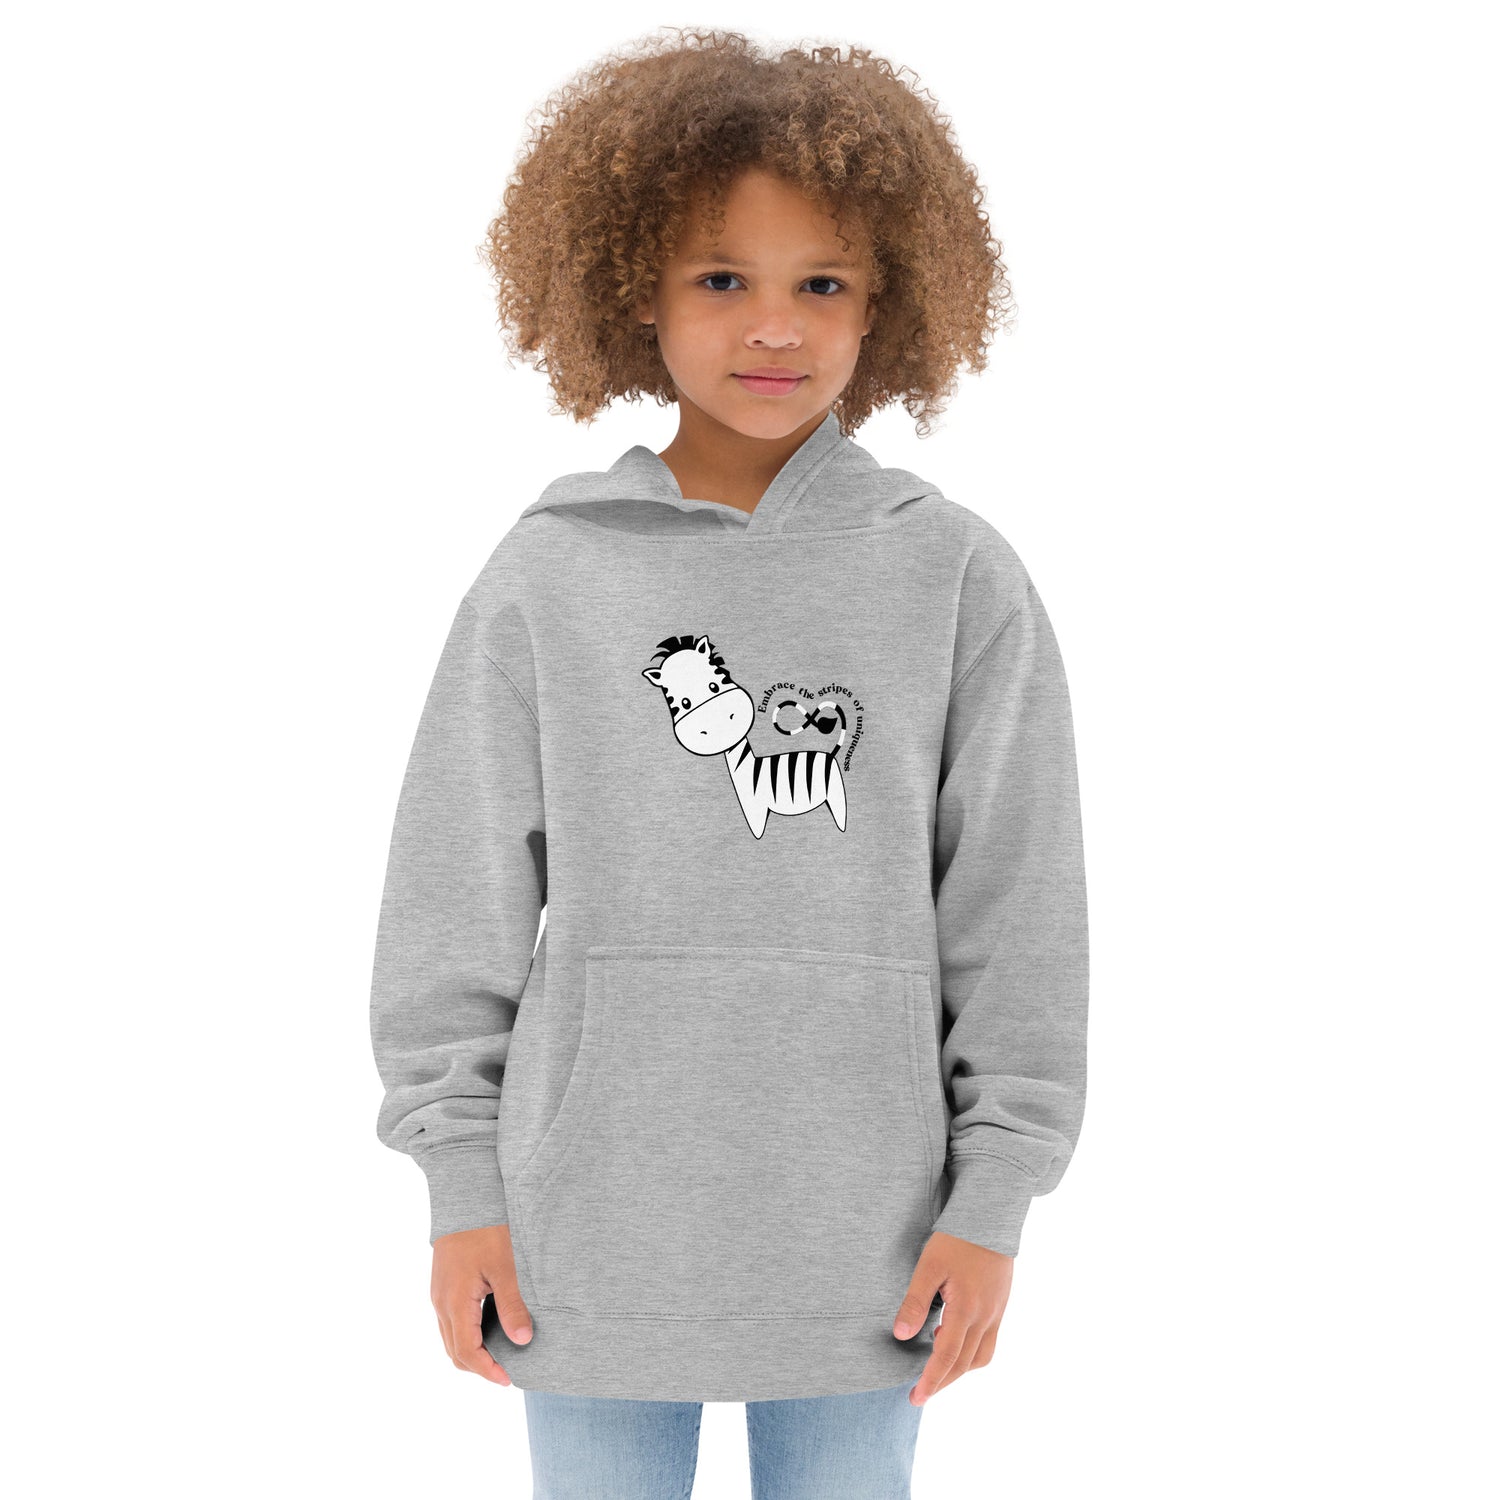 Grey Kidswear hoodie featuring a zebra print design with pockets at front.